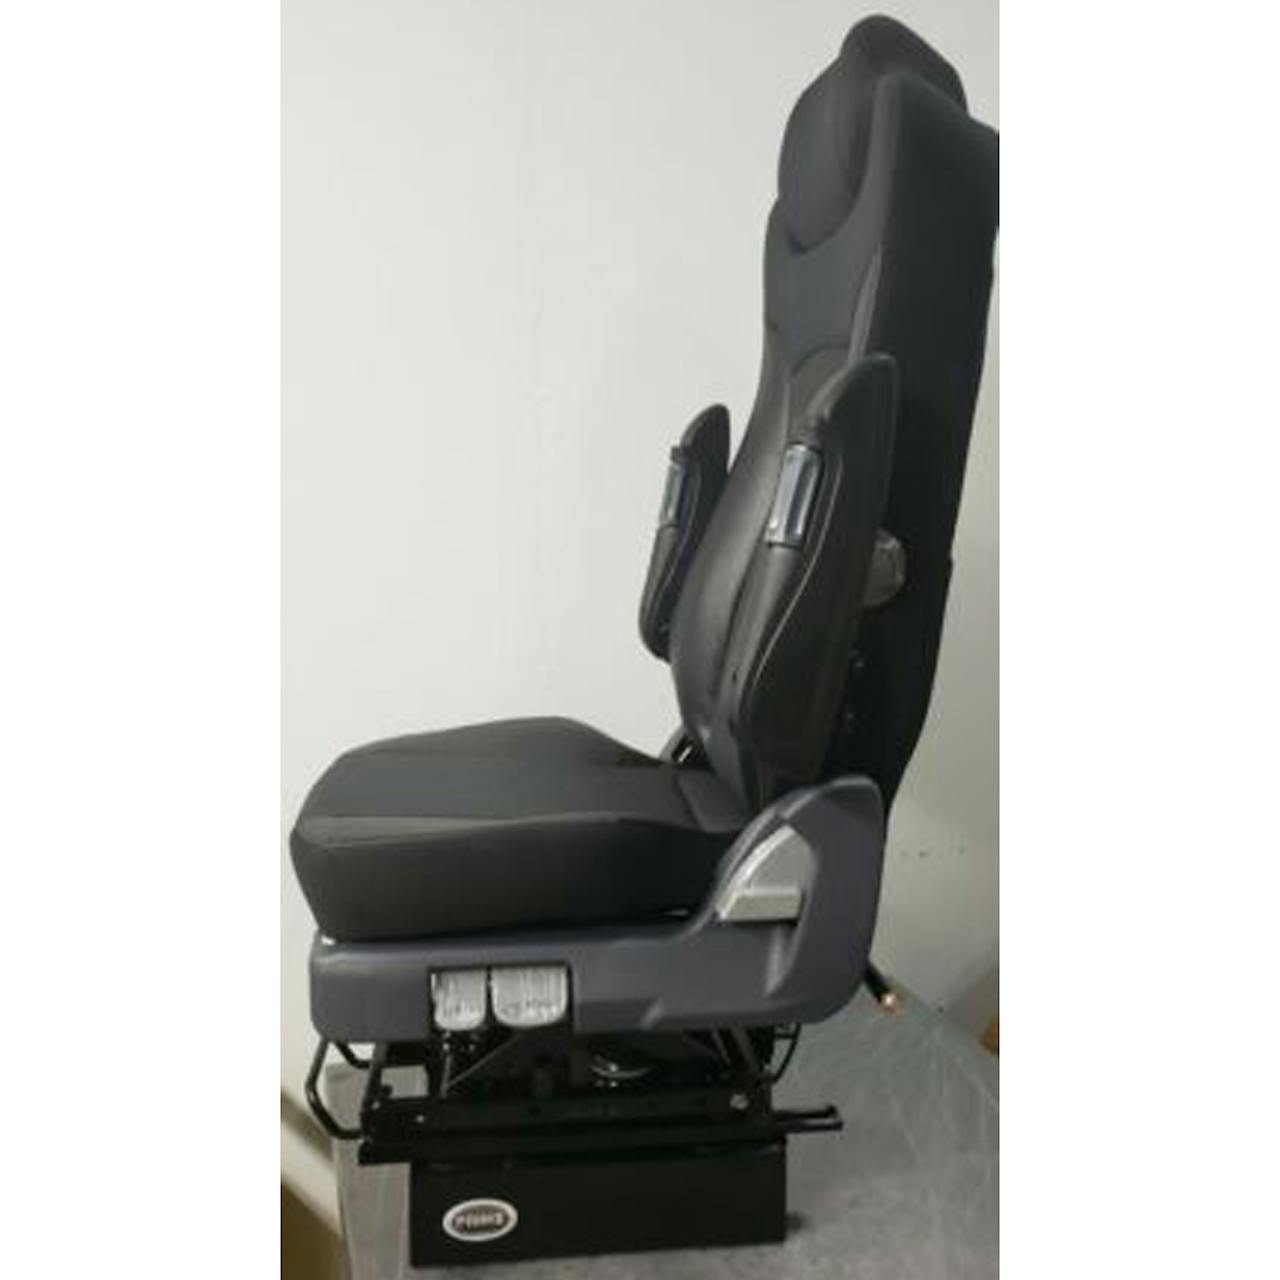 Prime TC200 Series Air Ride SEATS by Prime Seating